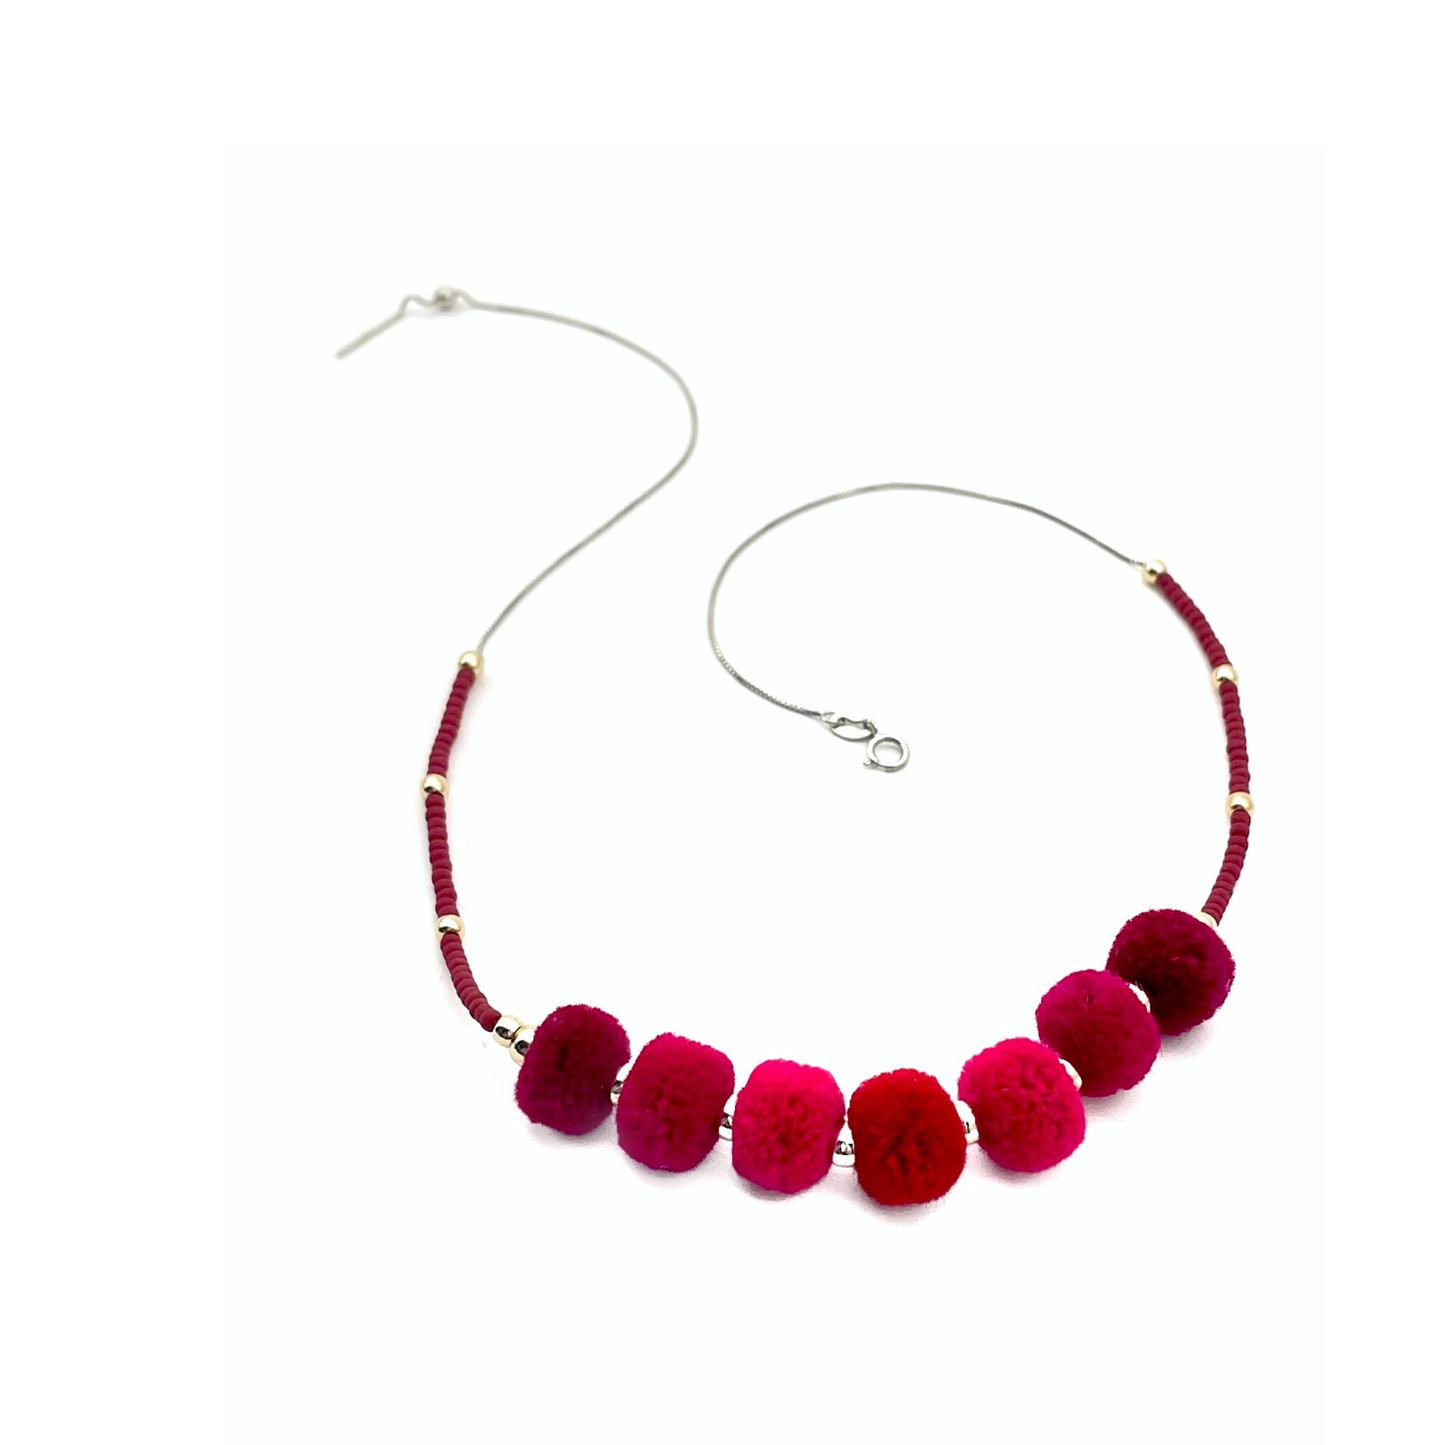 pom'd necklace in red currant